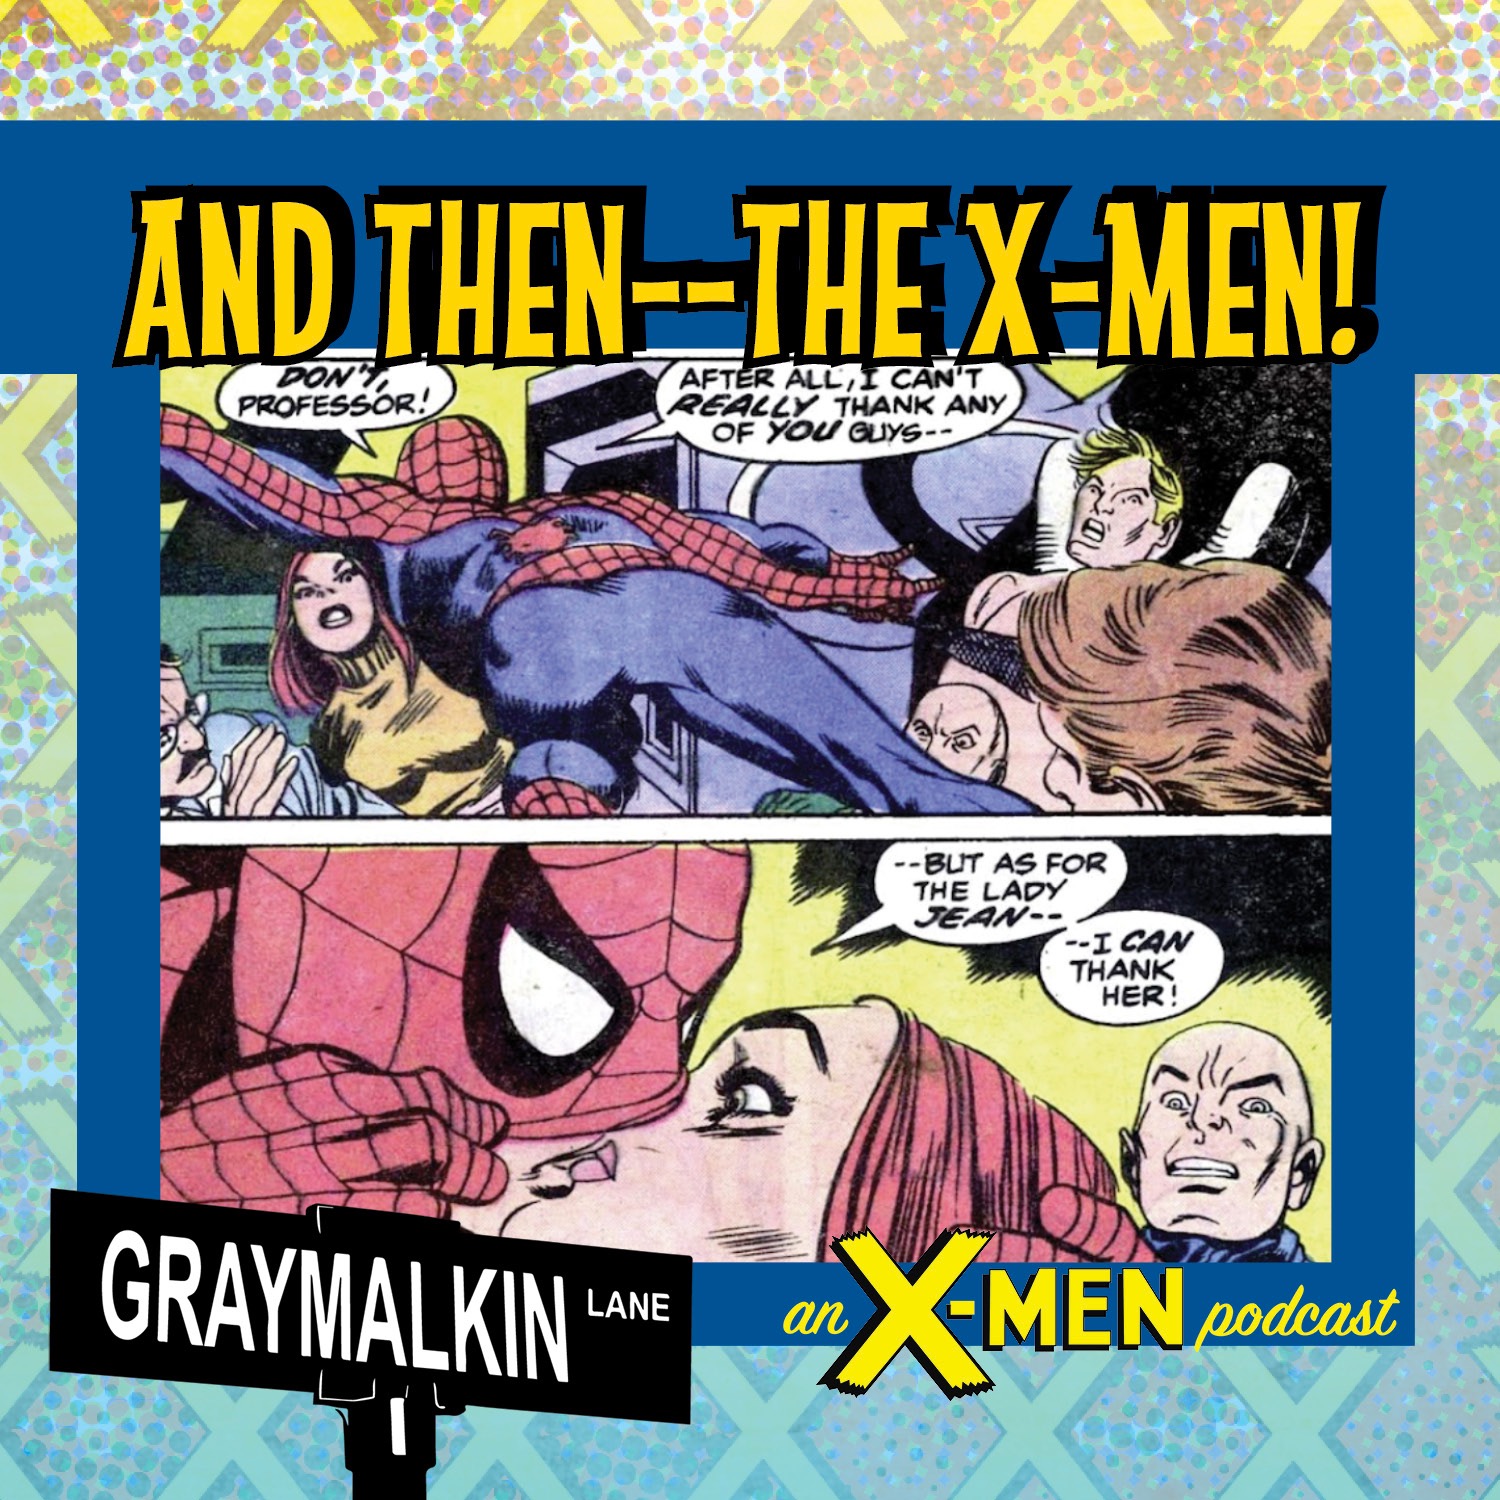 Marvel Team-up 4: And then--the X-Men! Featuring Michael Dialynas, Grace Freud, and Christian Smith!